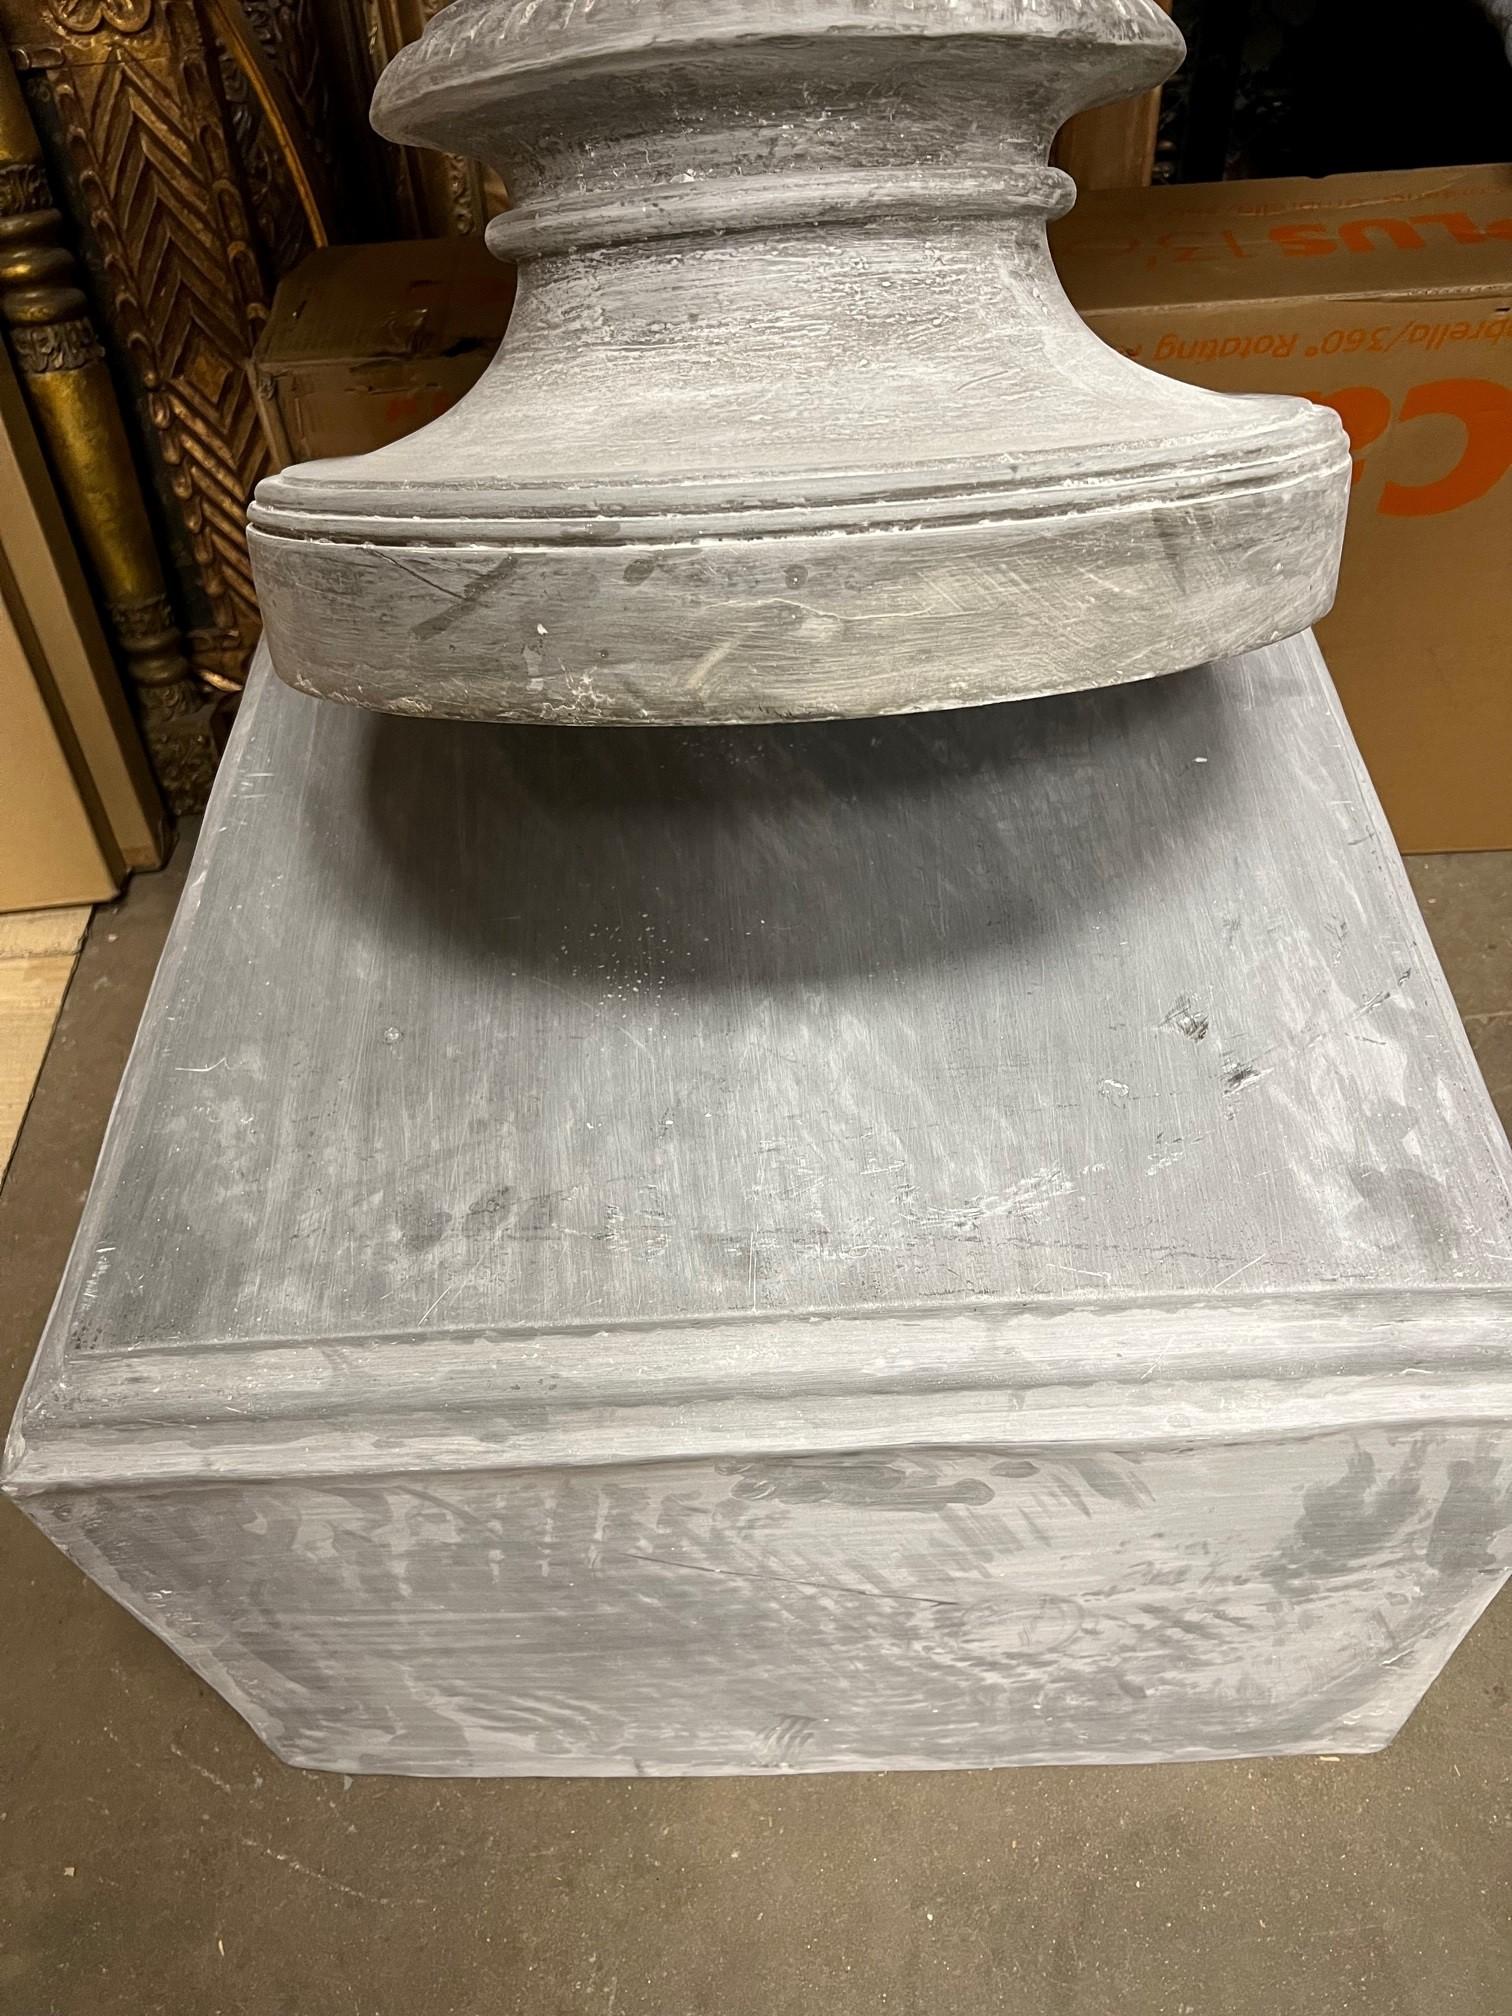 Monumental Reproduction Fiberglass Urn with Large Handles on a Pedestal  For Sale 7